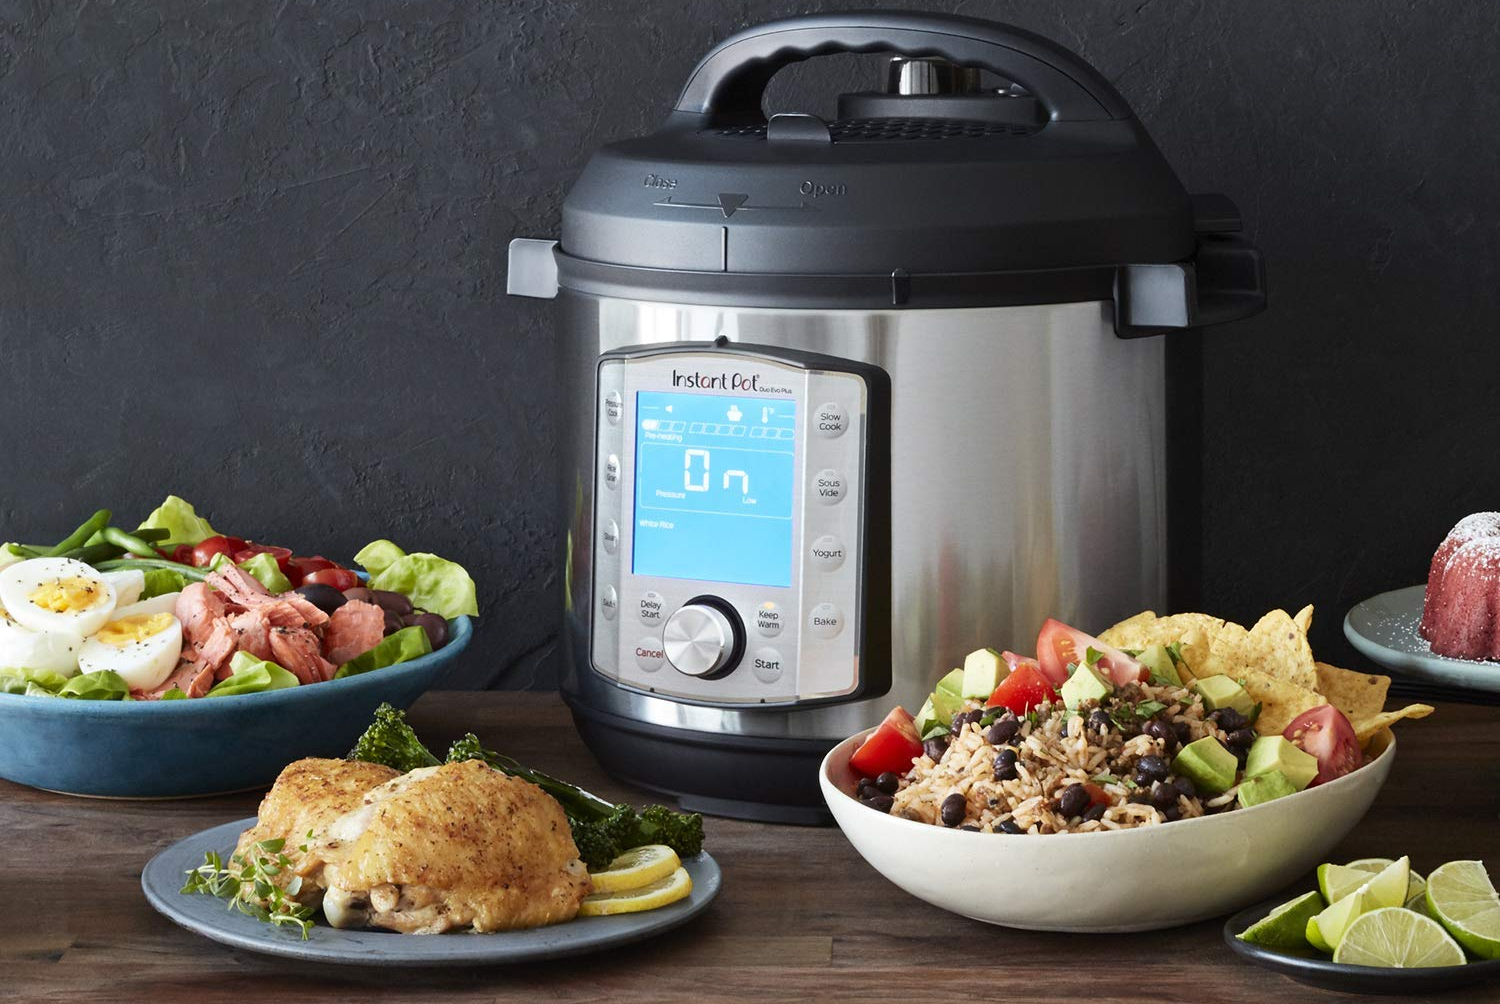 Cook Dinner at Lightspeed With Star Wars-Themed Instant Pots